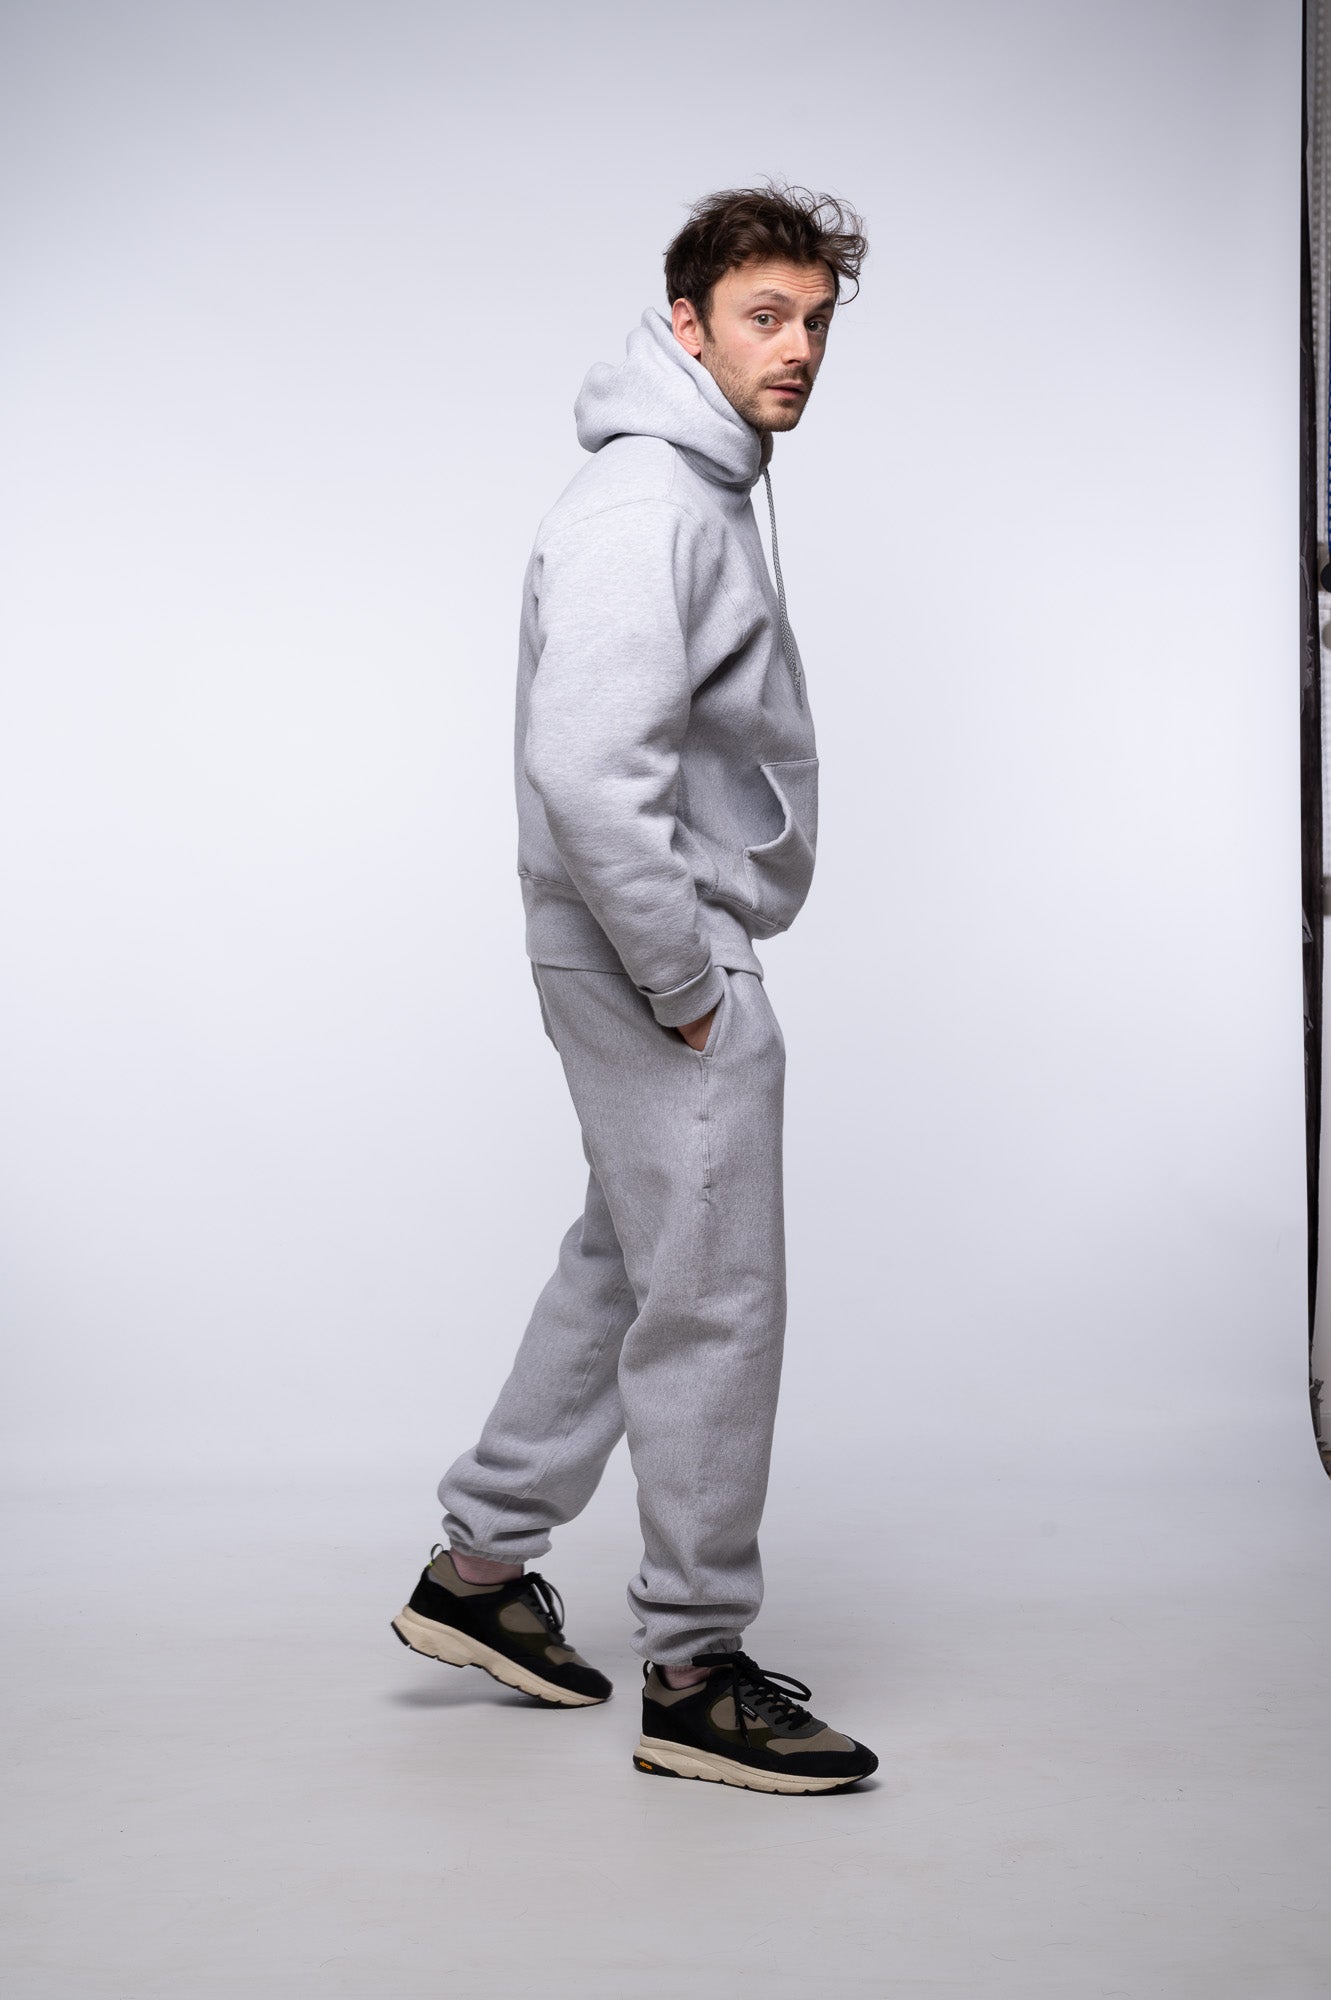 Camber Pullover Hoodie #232 - Grey